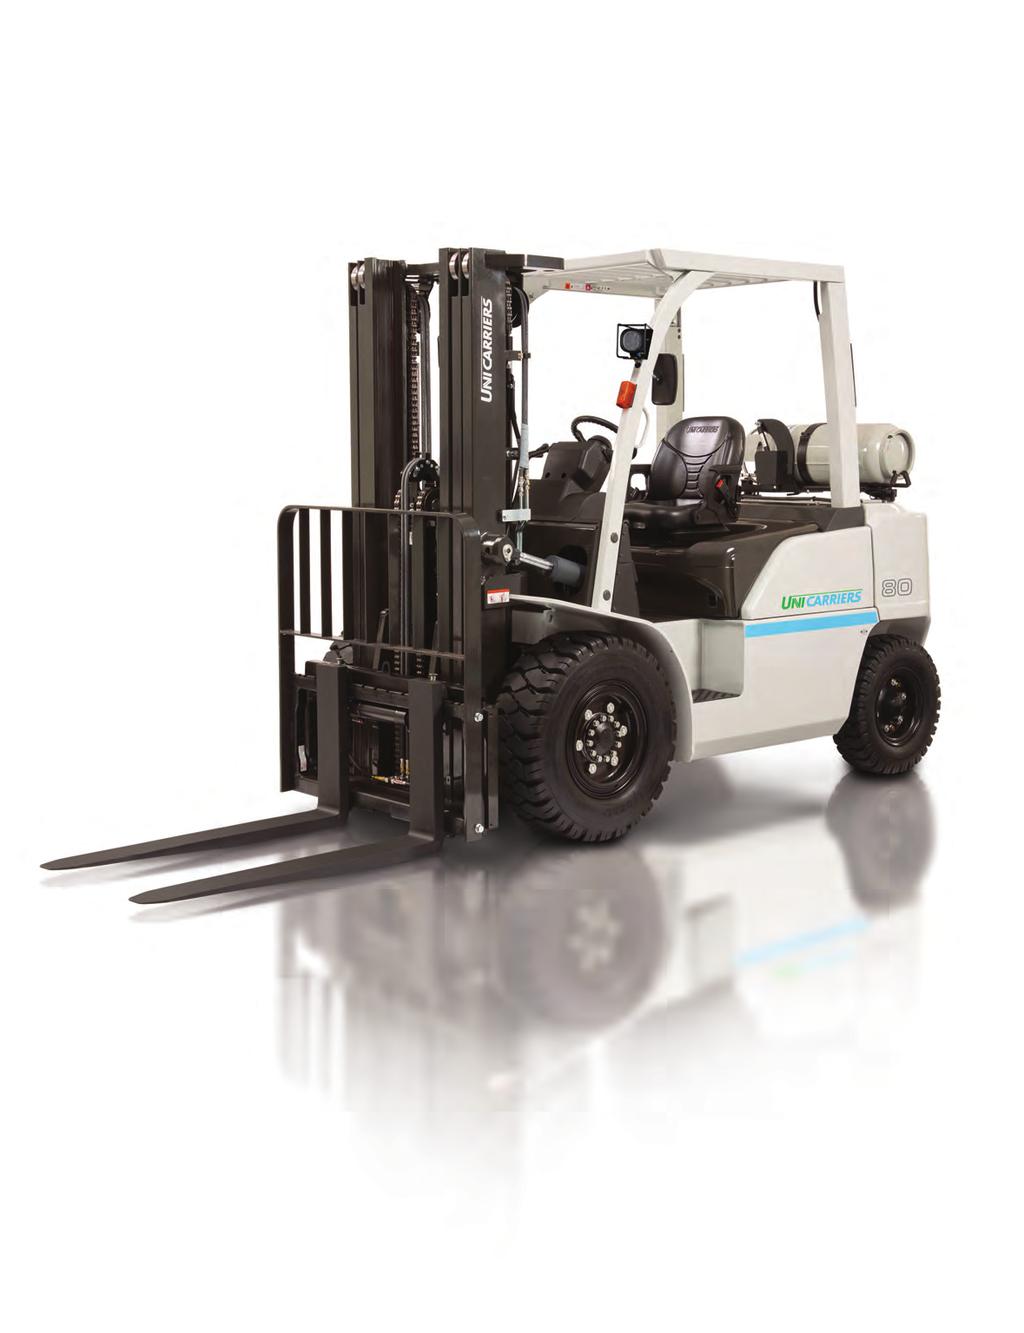 Reliability. It s the defining trait of our company and our forklifts.